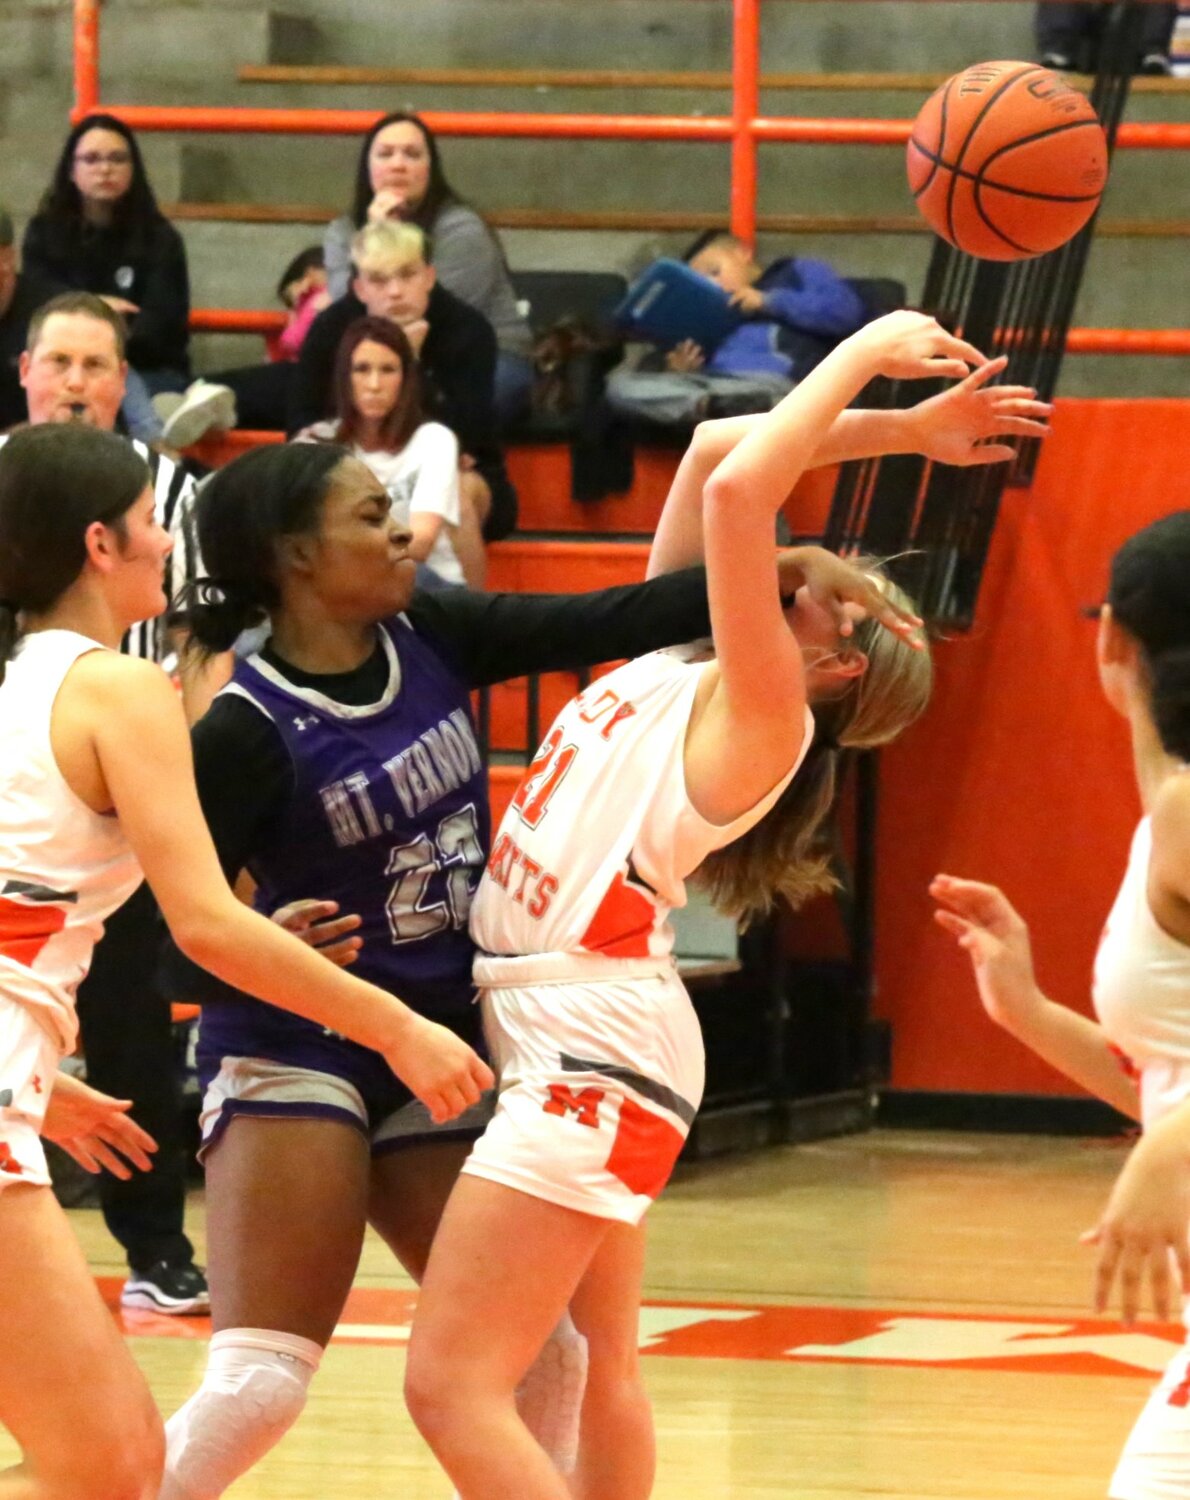 Basketball is certainly a contact sport. Mineola’s Kali Chrietzberg takes a forearm to the head in action against Mt. Vernon.